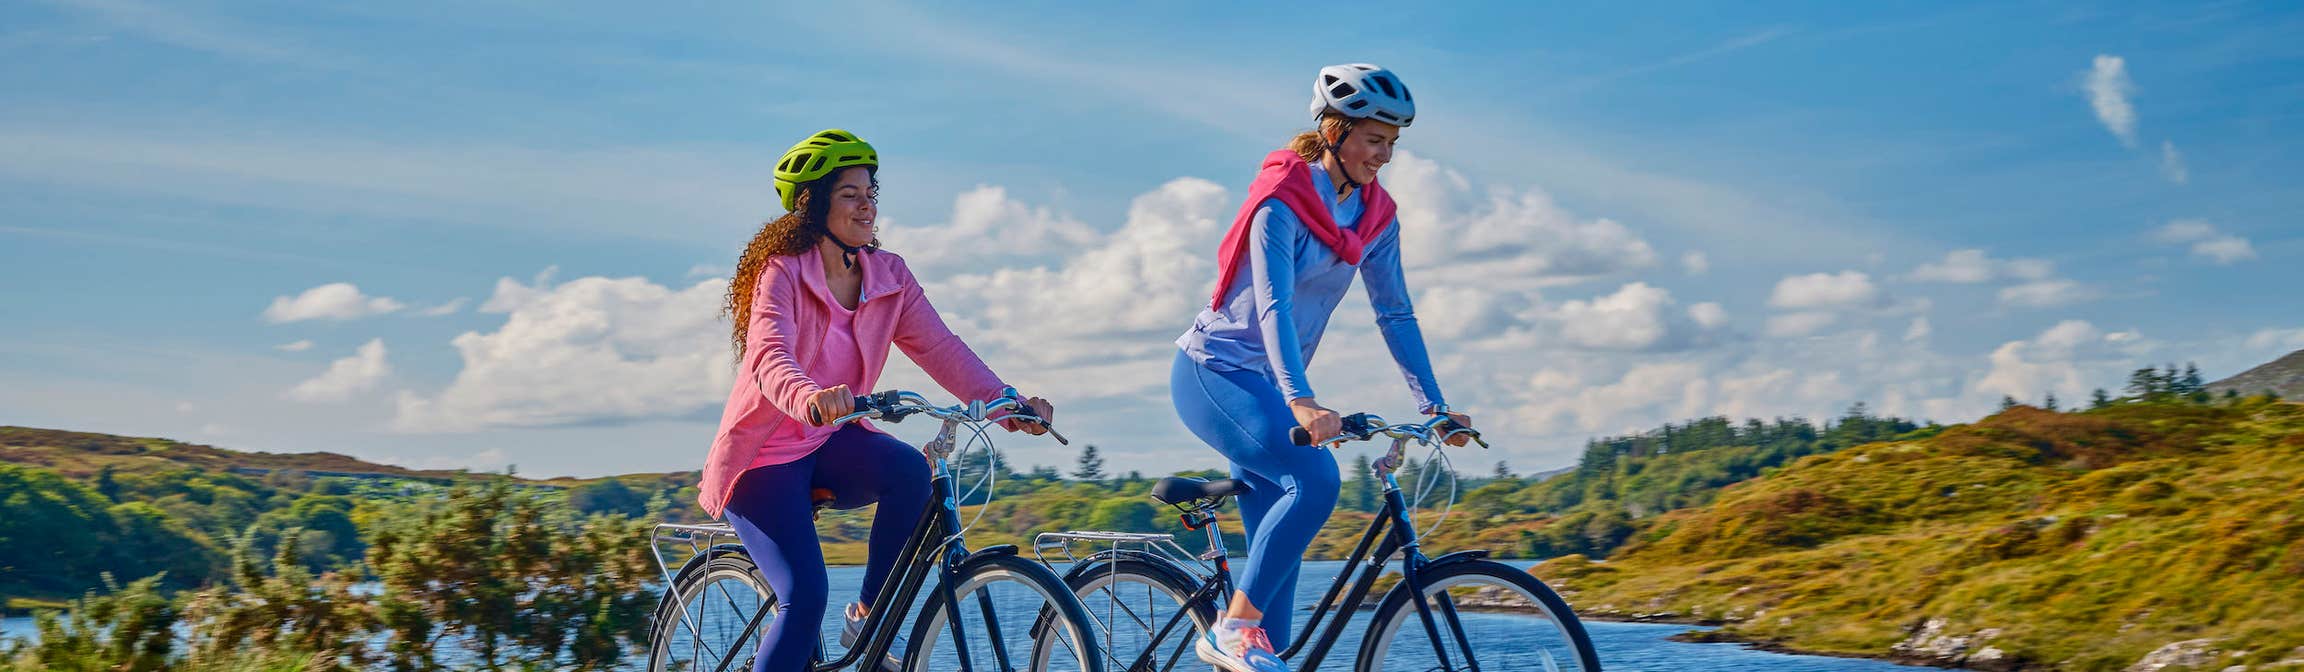 Two women cycling the Connemara Greenway in Galway